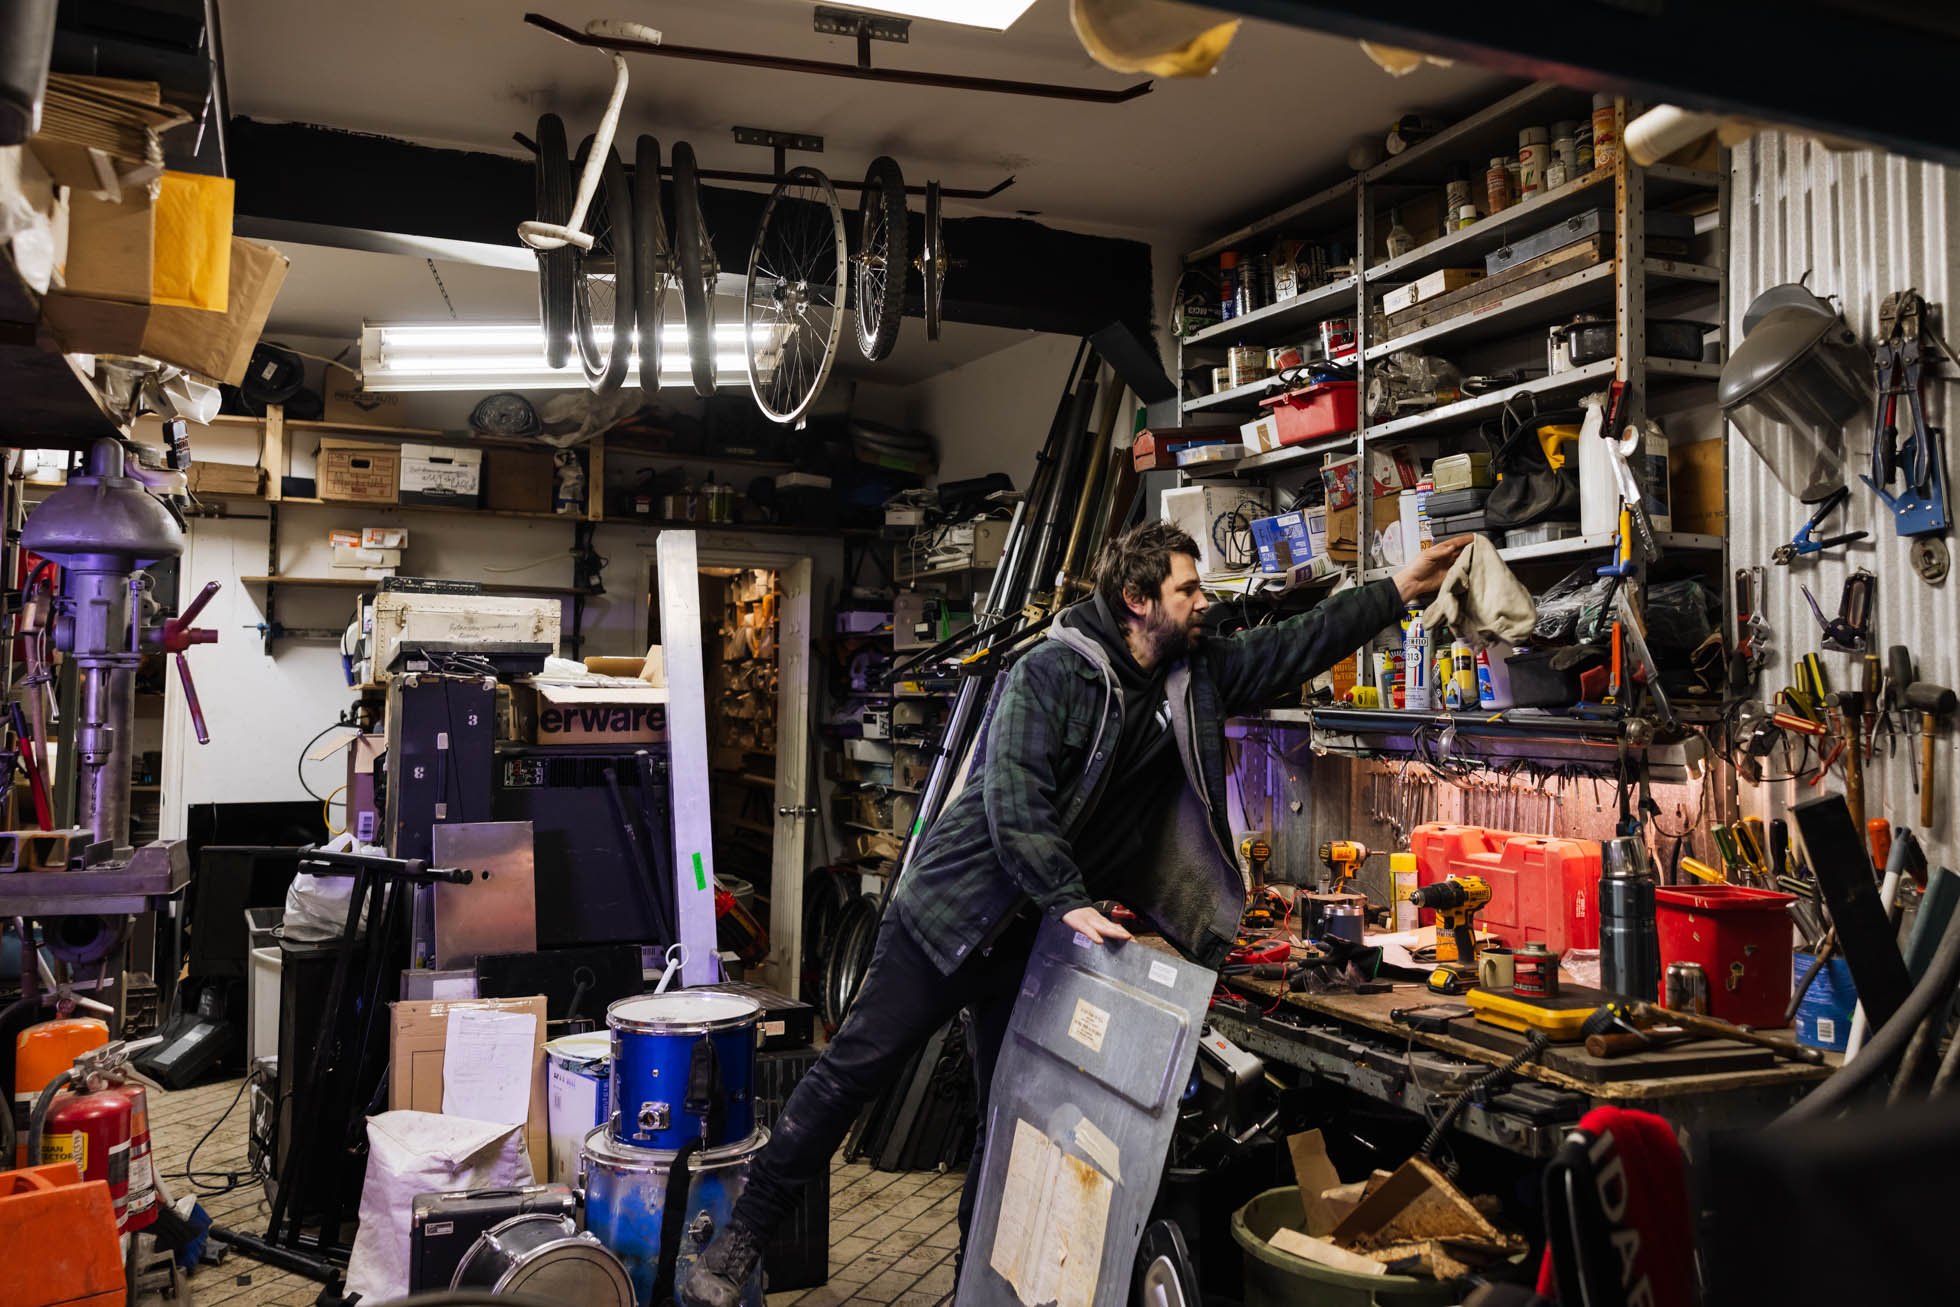  The energy inside Recyborg is intentional and structured, not chaotic. The people inside this worker cooperative are focused on repairing broken electronics and audio equipment. Their mission? To divert objects and devices of all kinds from landfill